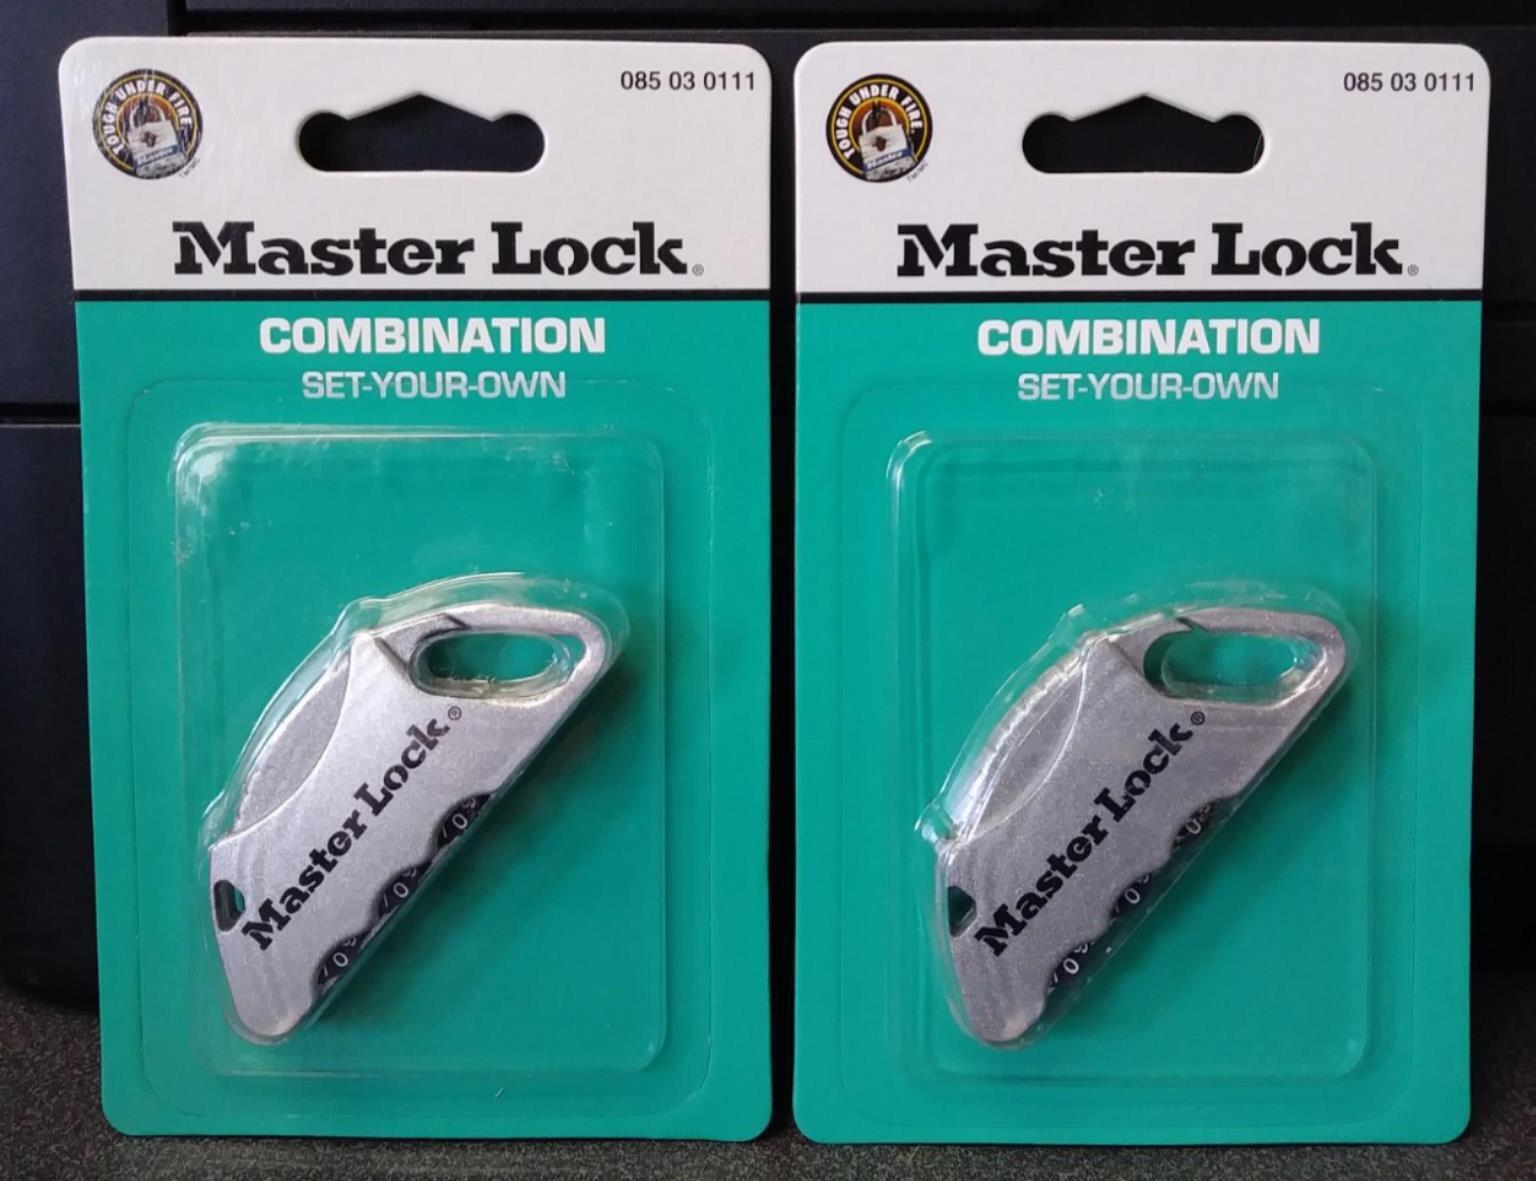 Master Lock 1556DTGT Combination Set-Your-Own Padlock (2 Packs)